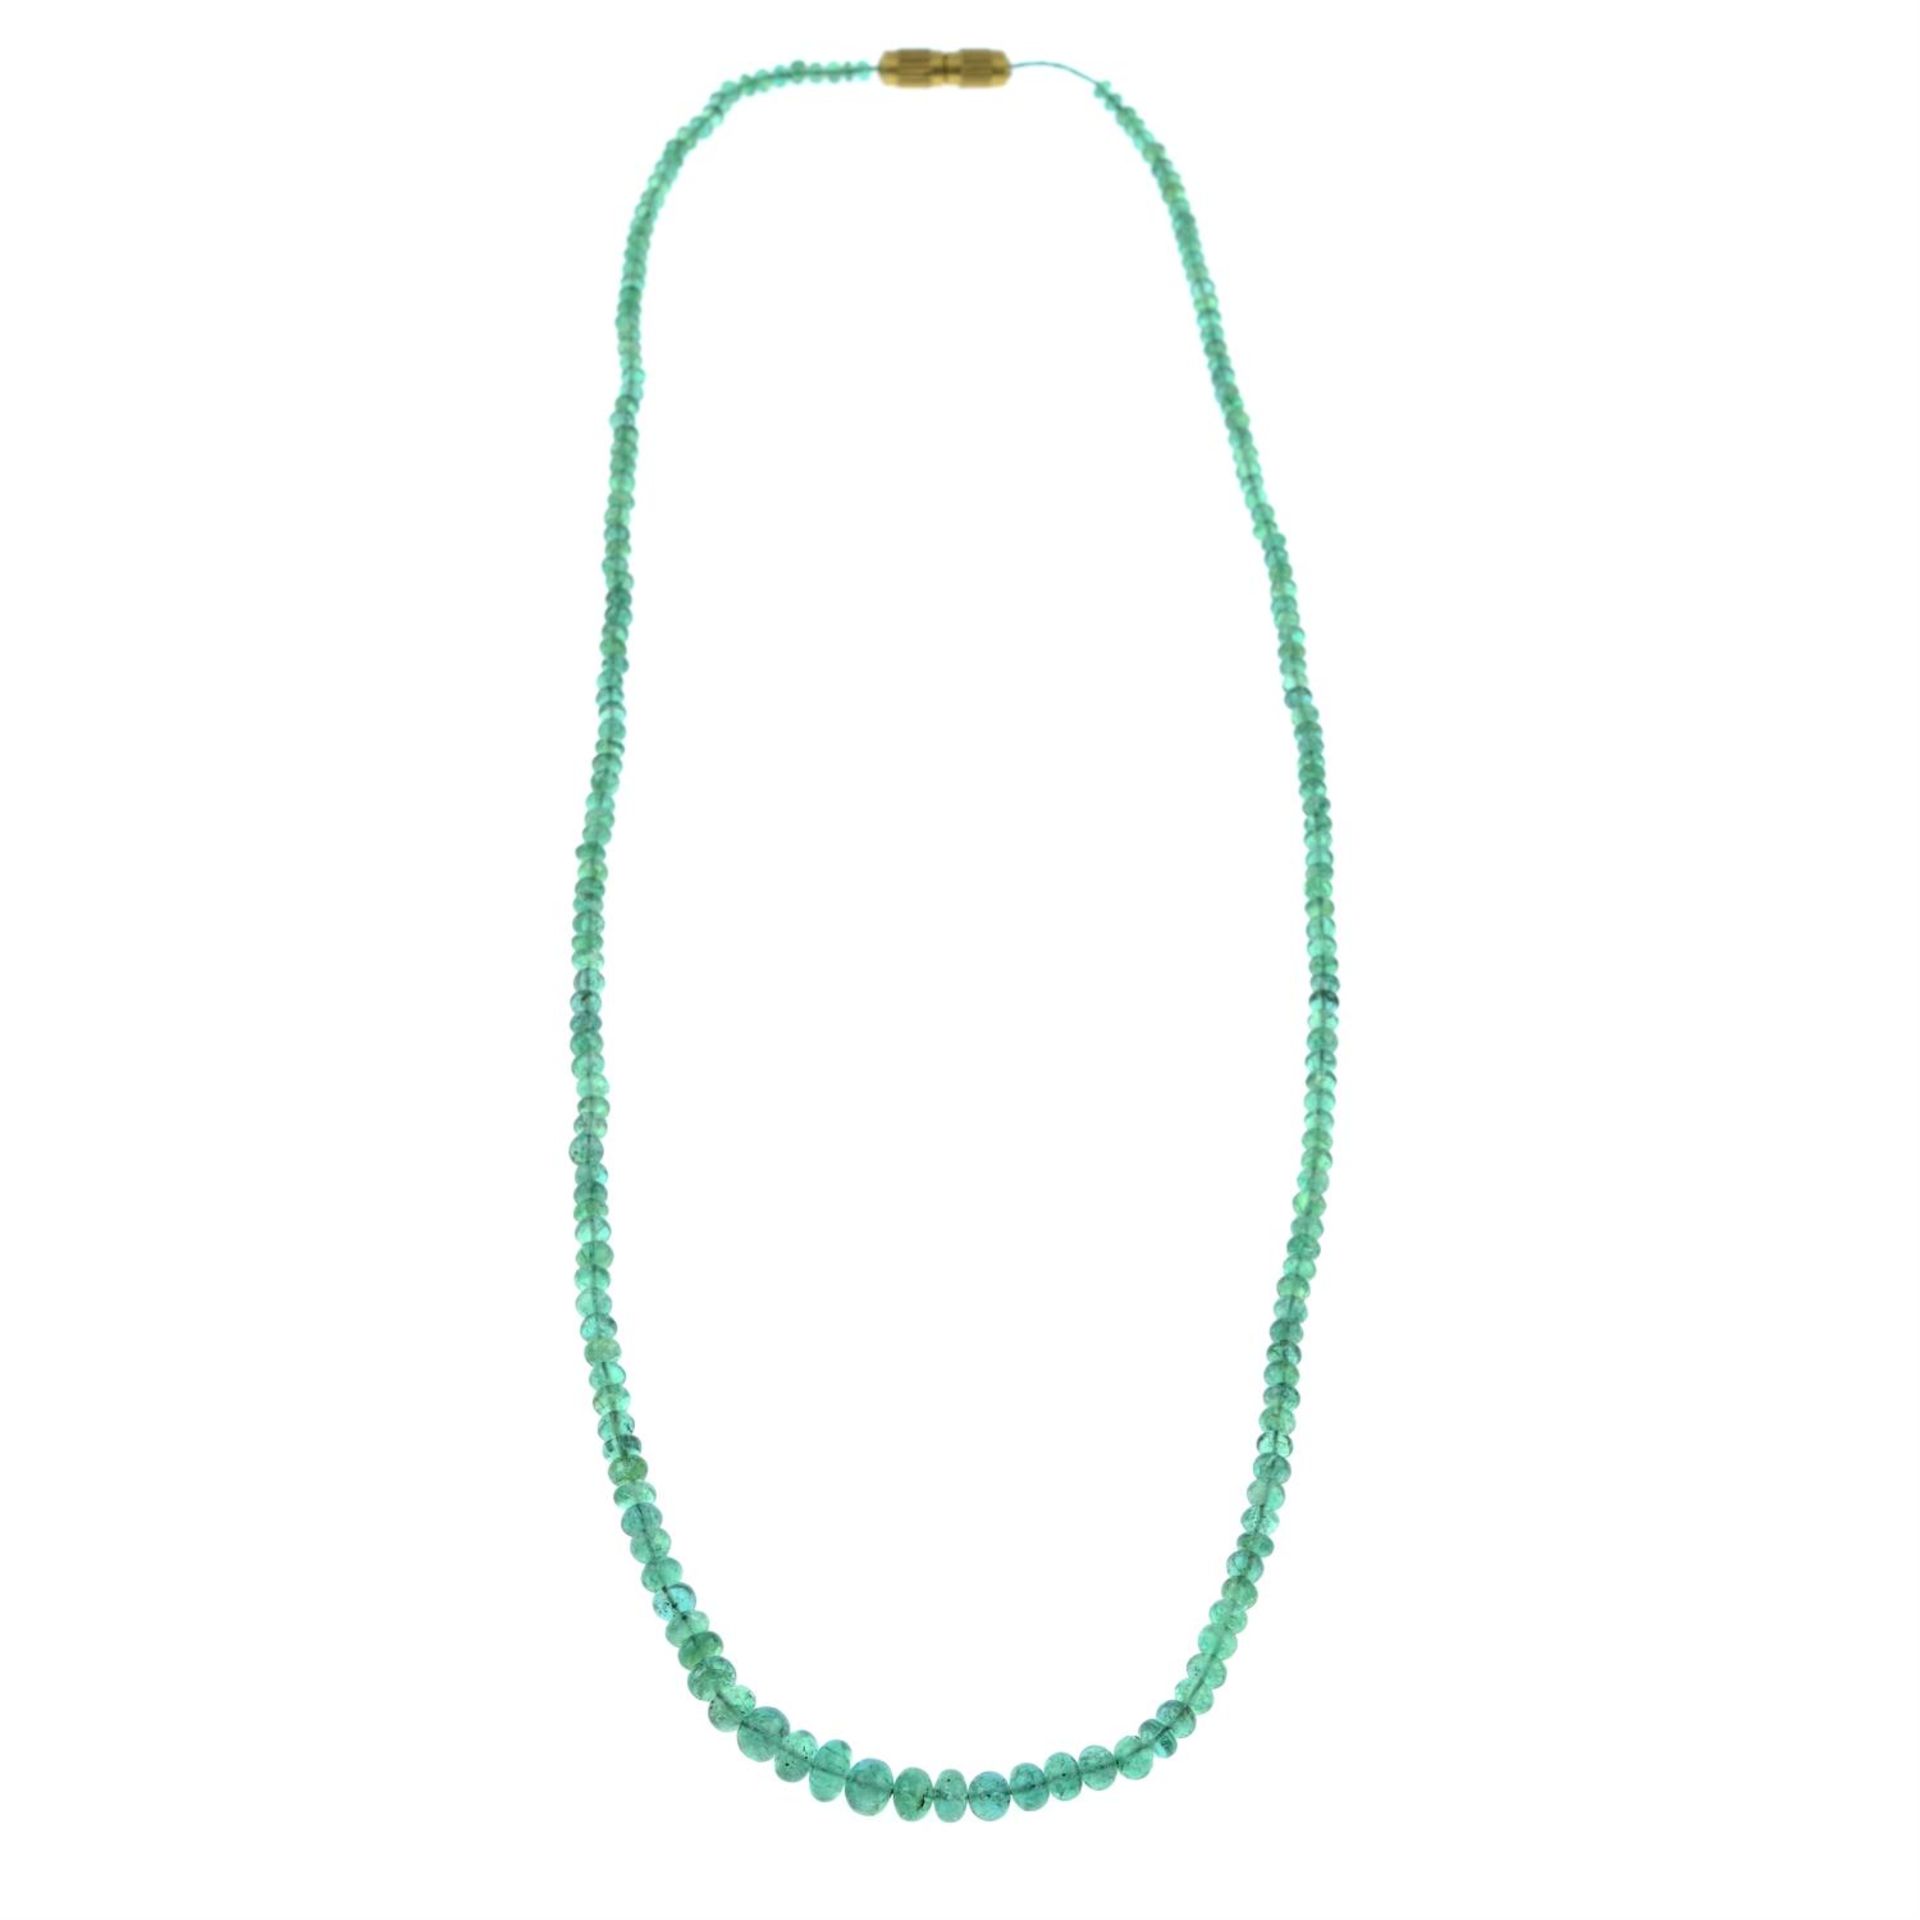 A graduated emerald bead necklace. - Image 2 of 2